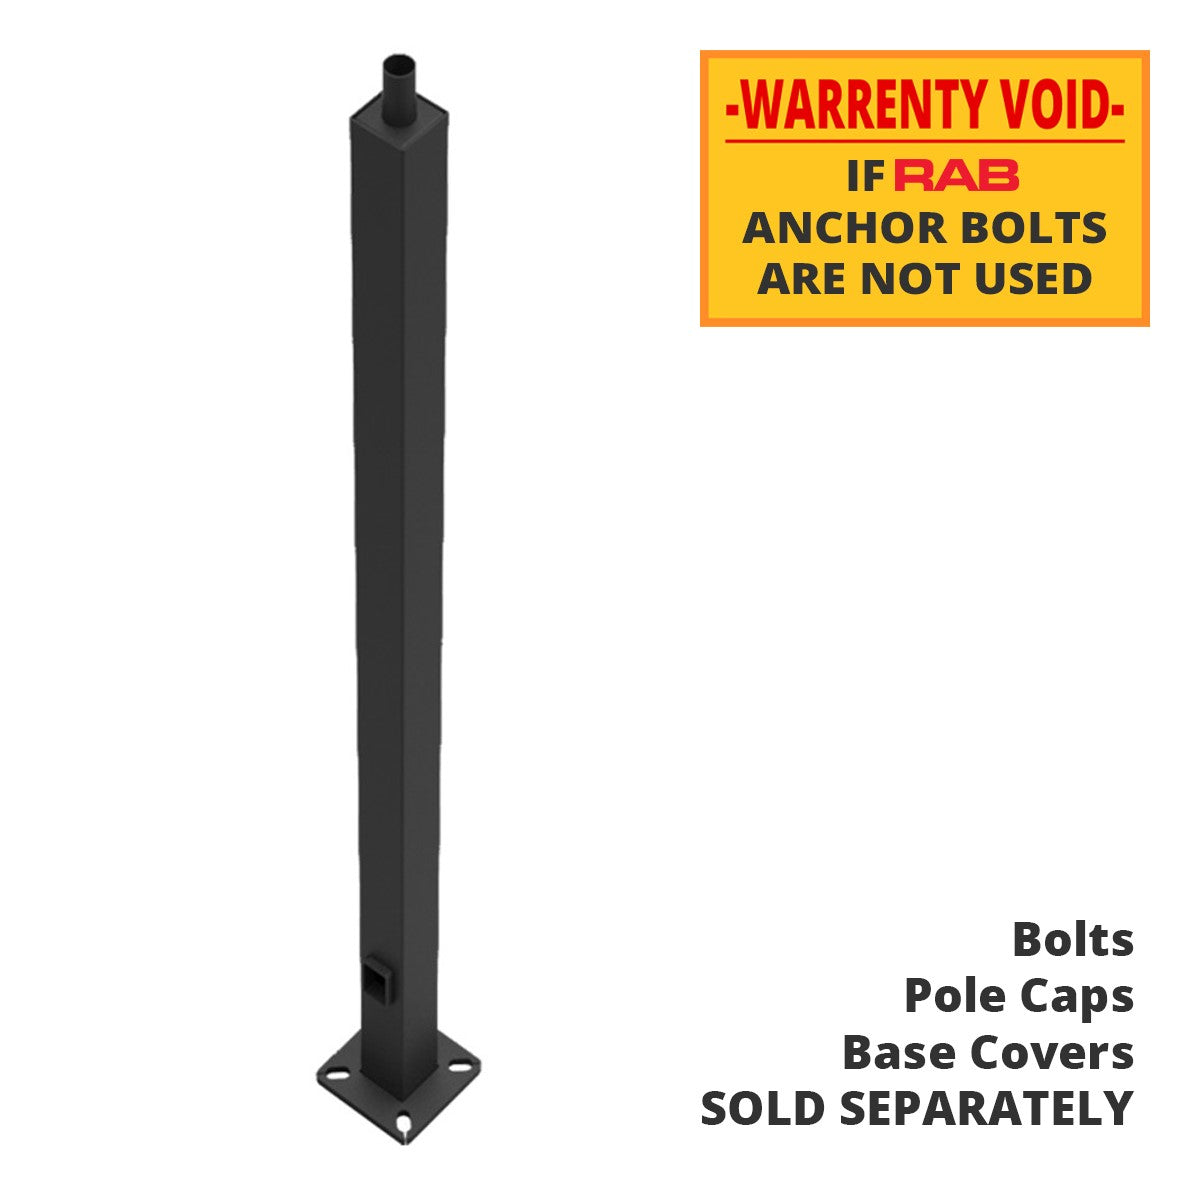 10 Ft Square Steel Tenon Top Pole 4 In. Shaft 11 Gauge